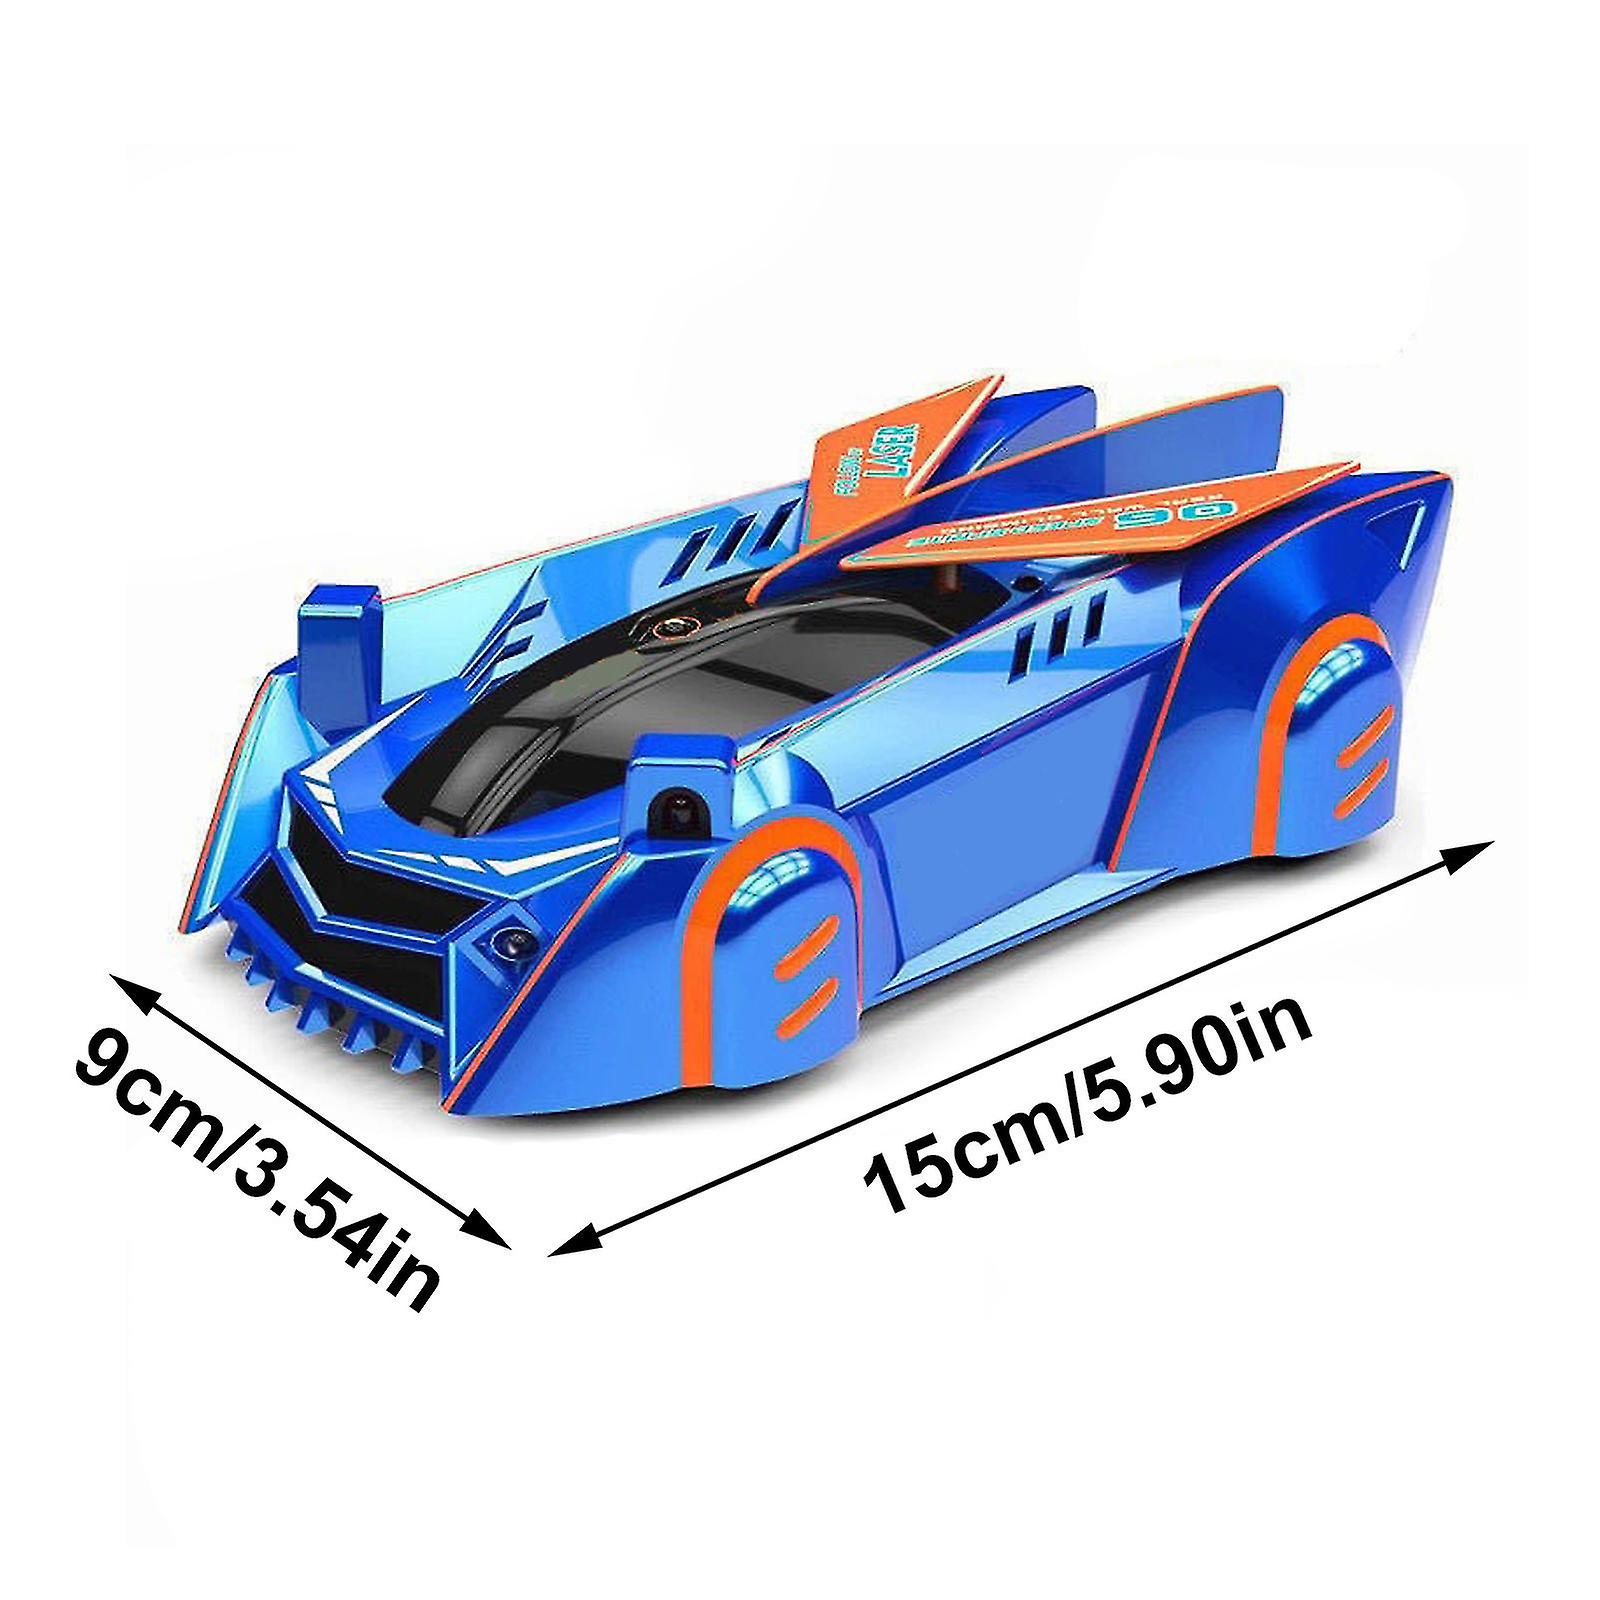 Gravity Laser-guided Wall Climbing Remote Control Cars， 360rotating Stunt Toy Car， Latest Headlights And Taillight